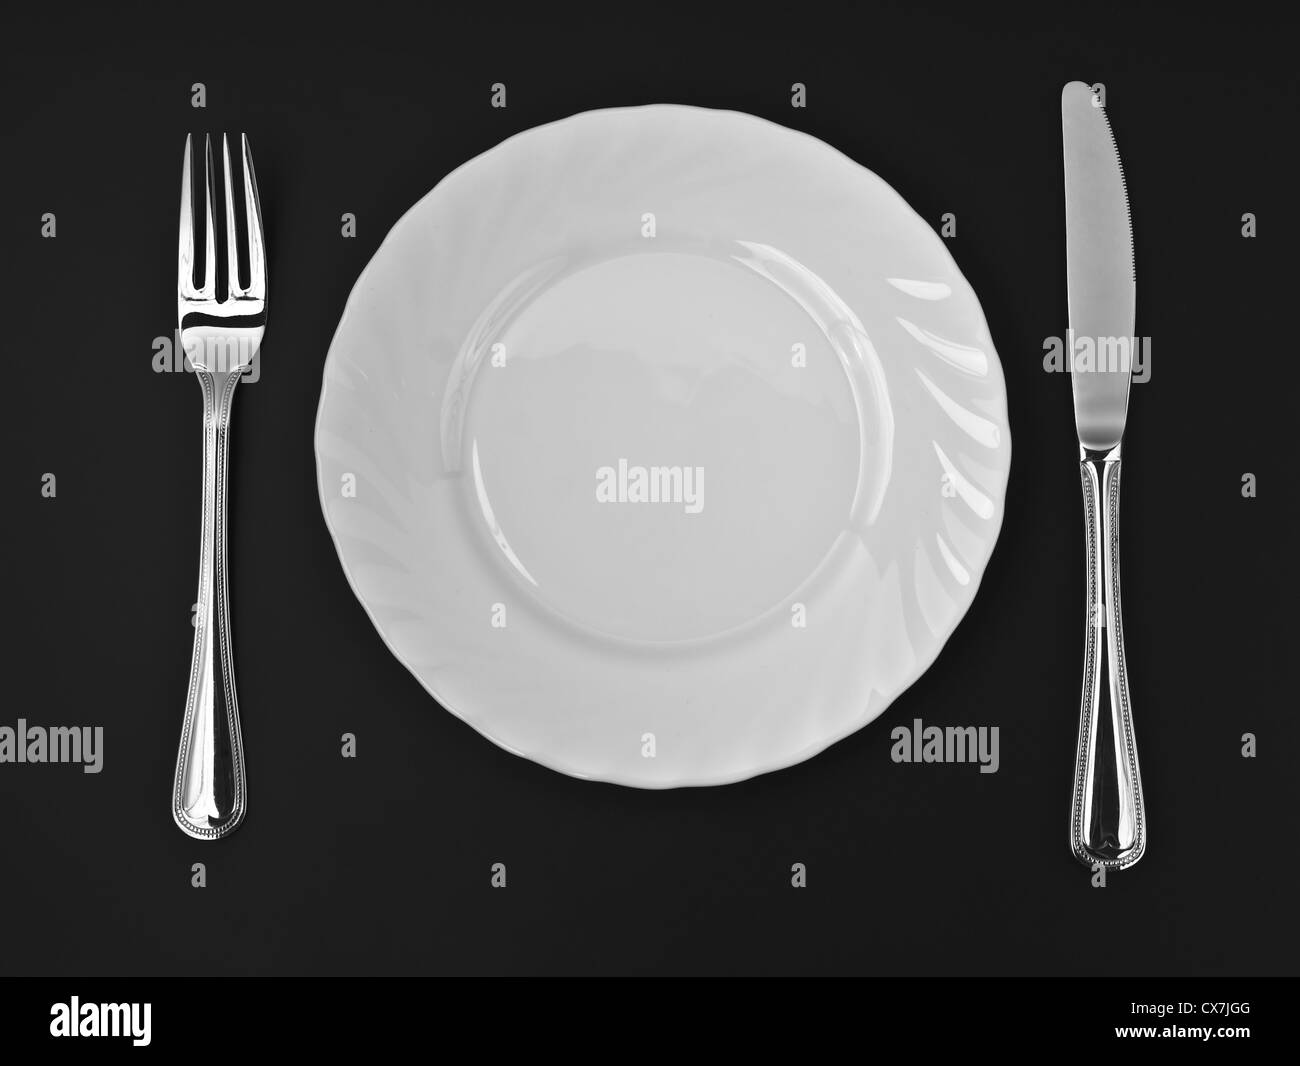 Knife, white plate and fork on black background Stock Photo